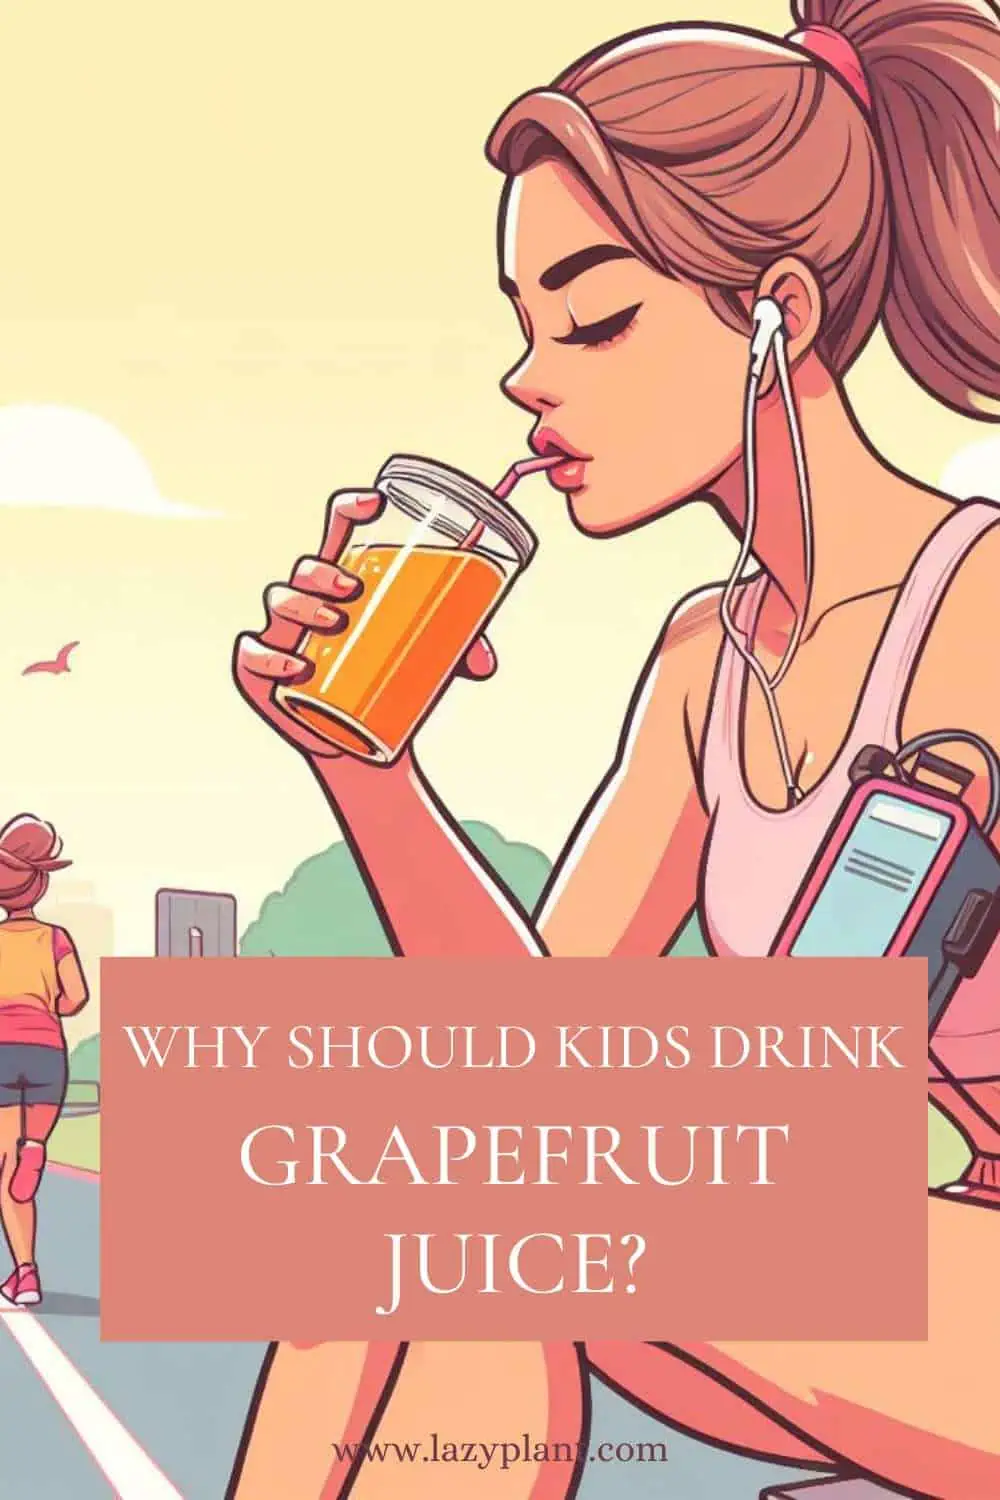 Why should children and adolescents drink grapefruit juice?